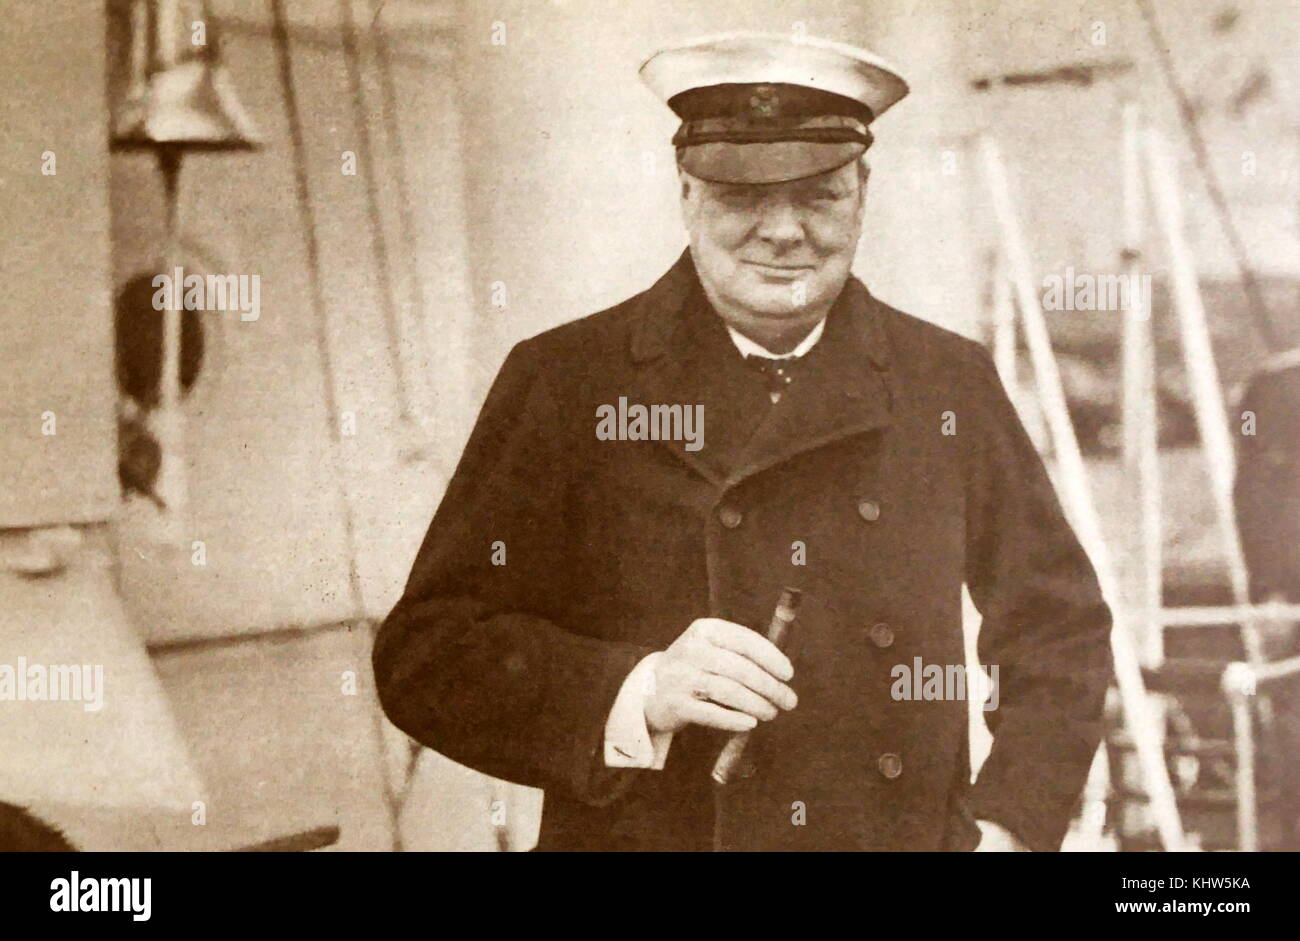 Photograph of Winston Churchill on board H.M.S. 'Enchantress'. Sir Winston Leonard Spencer-Churchill (1874-1965) a British politician and Prime Minister of the United Kingdom. Dated 20th Century Stock Photo